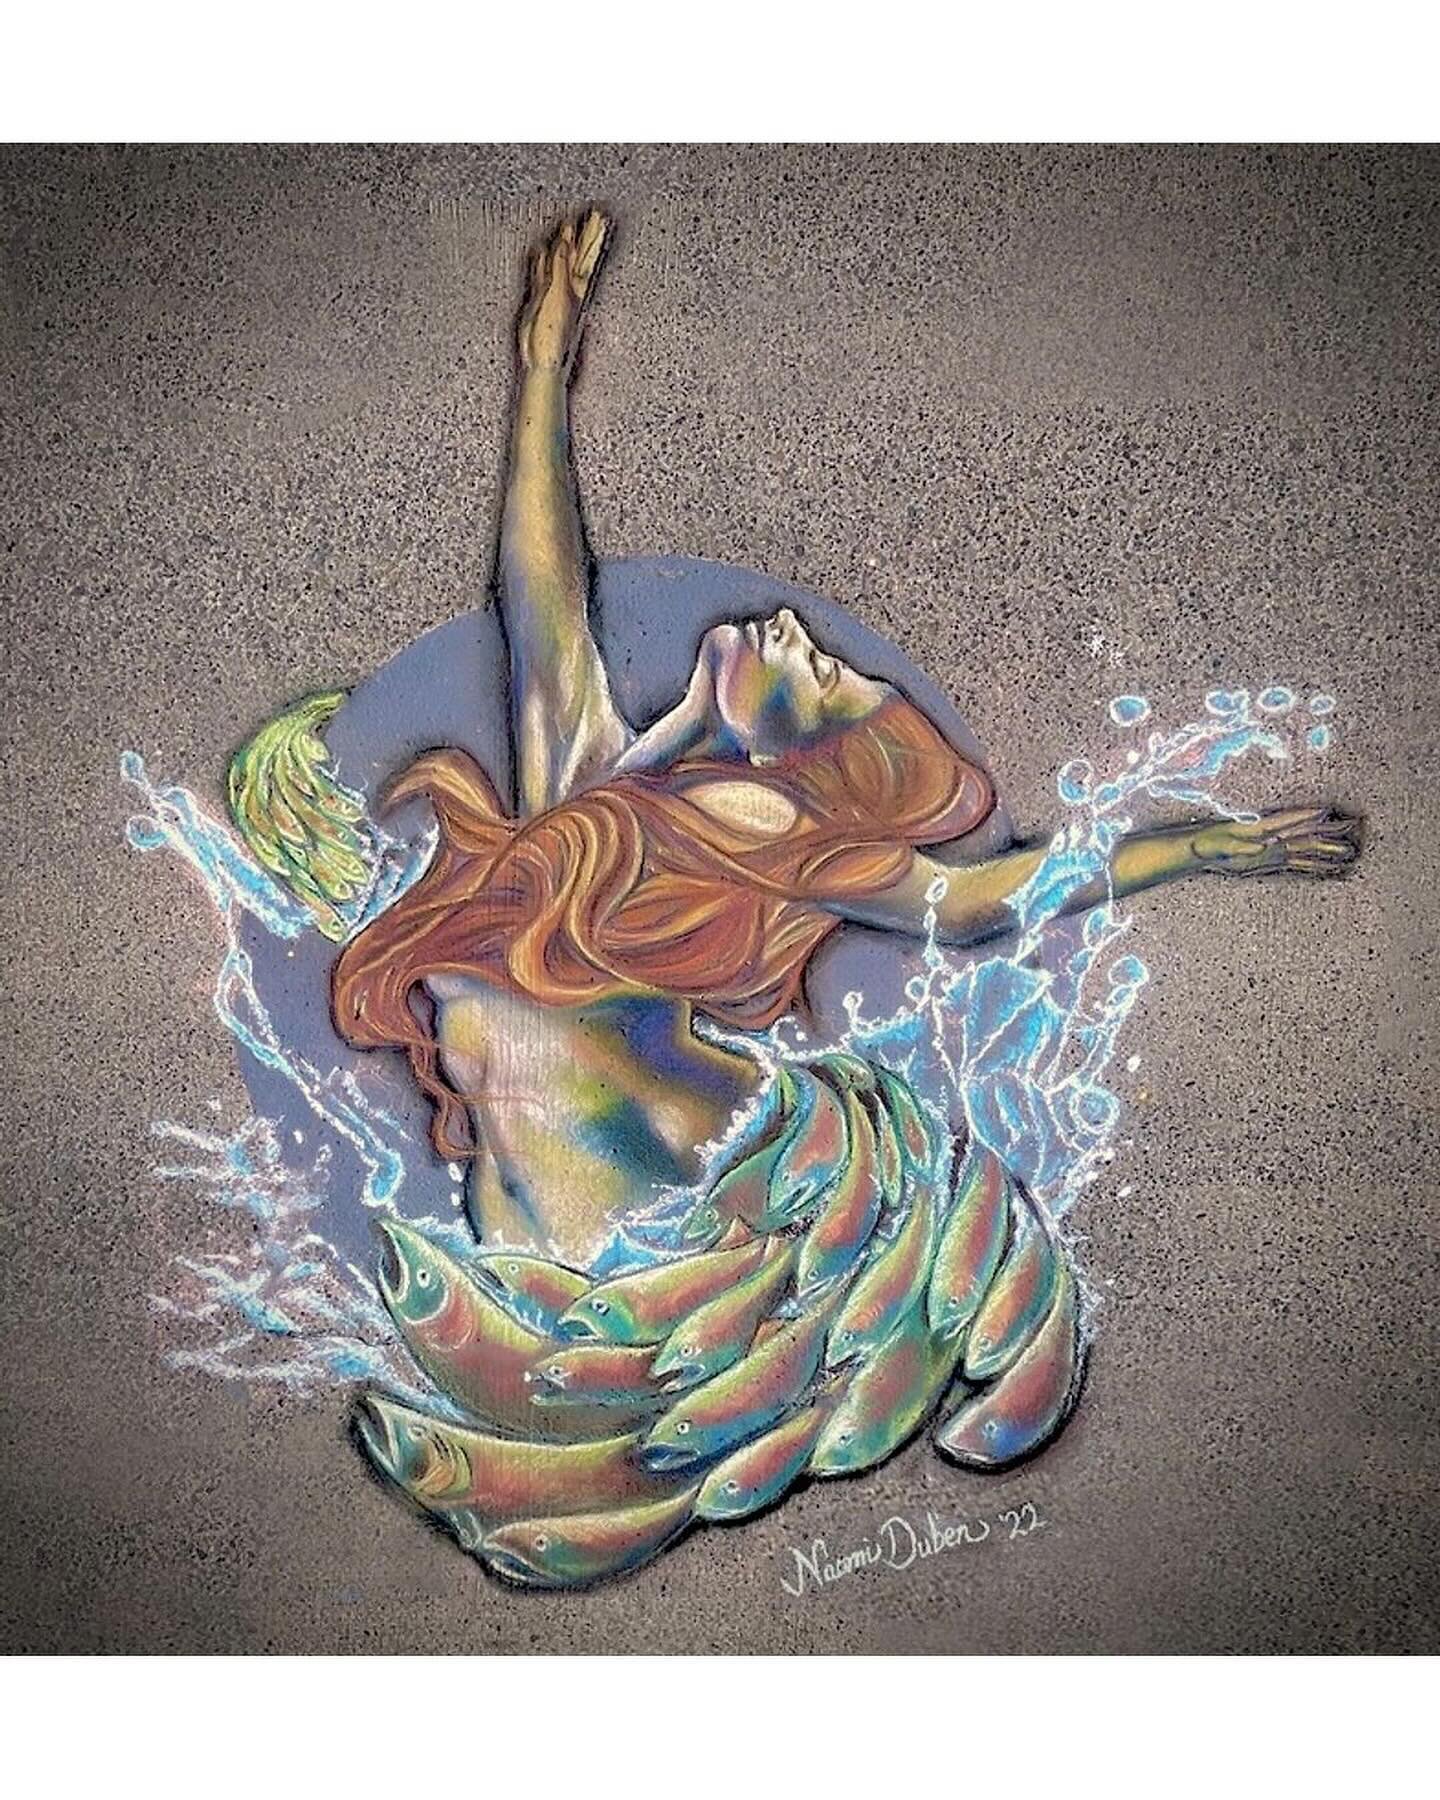 Every Chalk Festival is an opportunity to learn something new and improve, or be better prepared for the next time. This time around, I discovered this beautiful image of a woman swimming with fish. Very astrological and Pisces/Aquarius like. 

I set